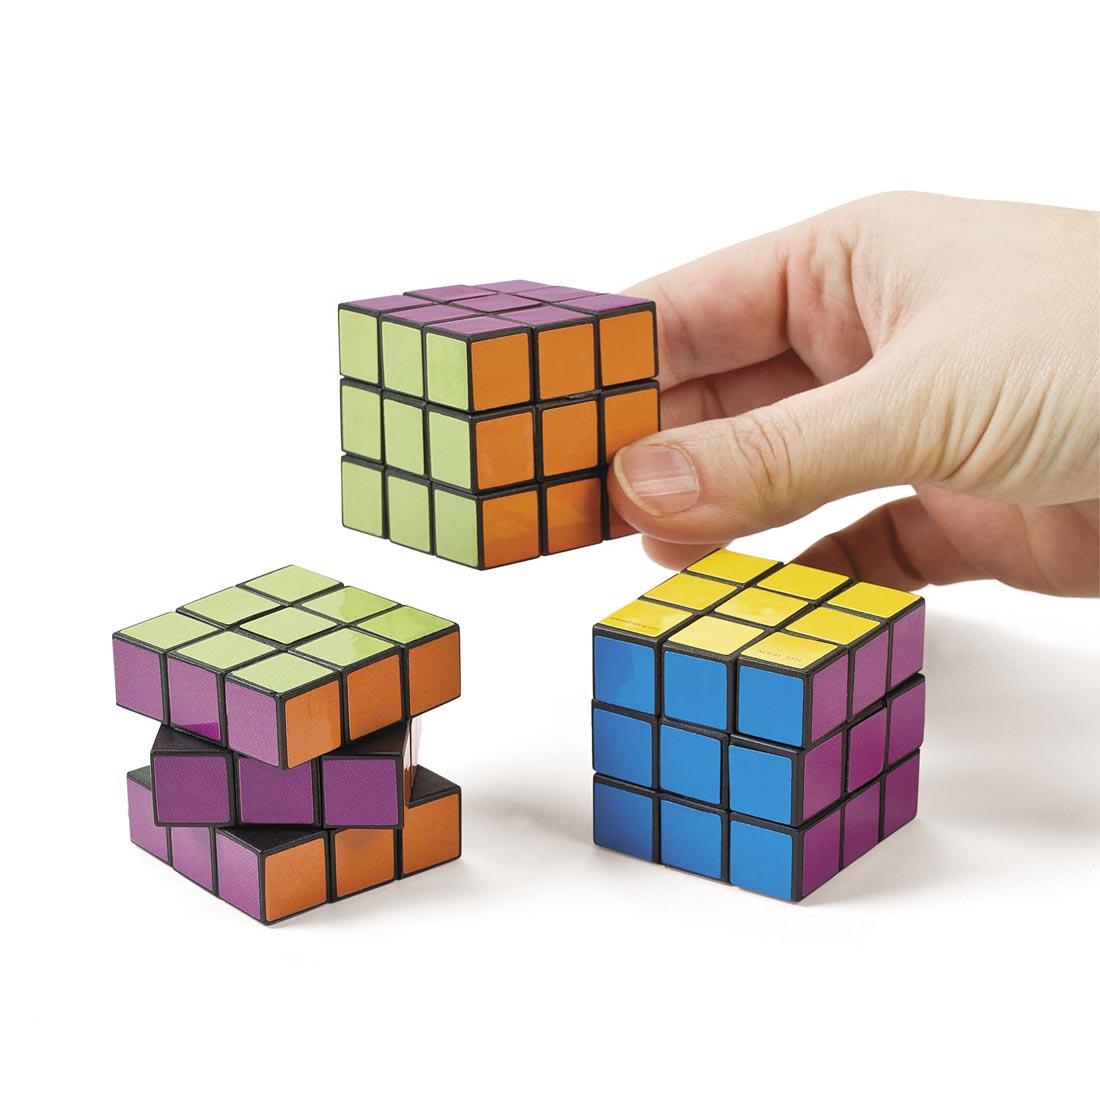 three Mini Bright Magic Cubes by Fun Express; a hand is holding one of them